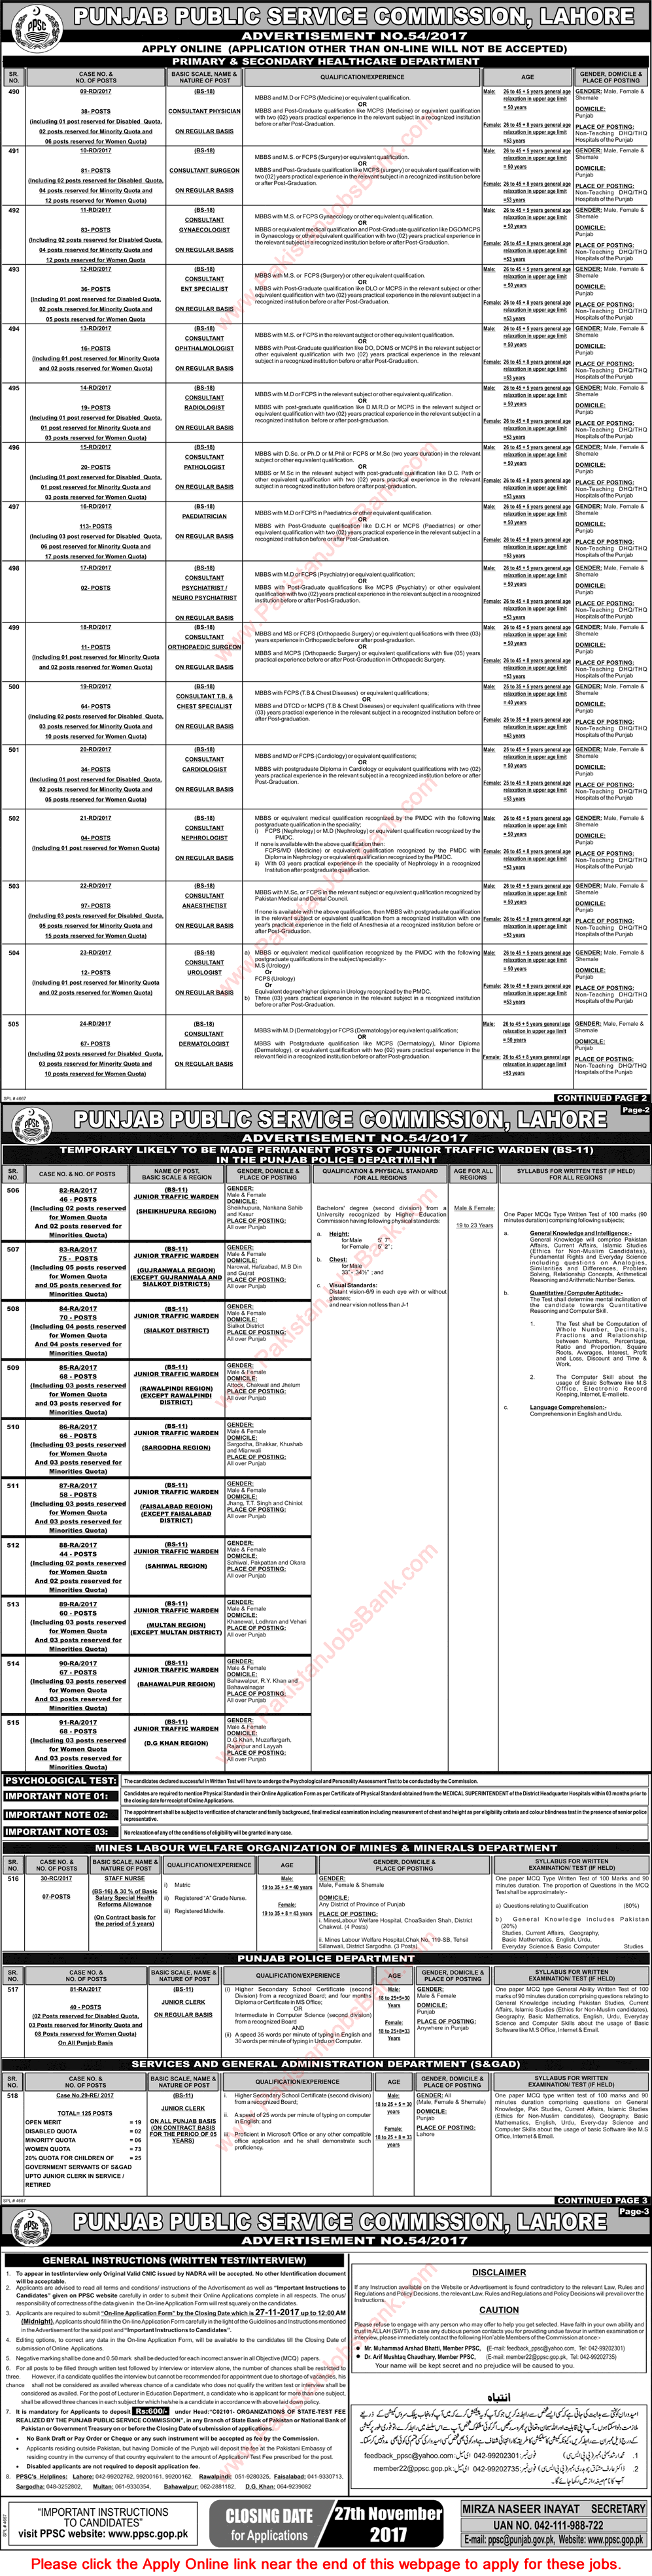 PPSC Jobs November 2017 Apply Online Consolidated Advertisement 54/2017 Latest